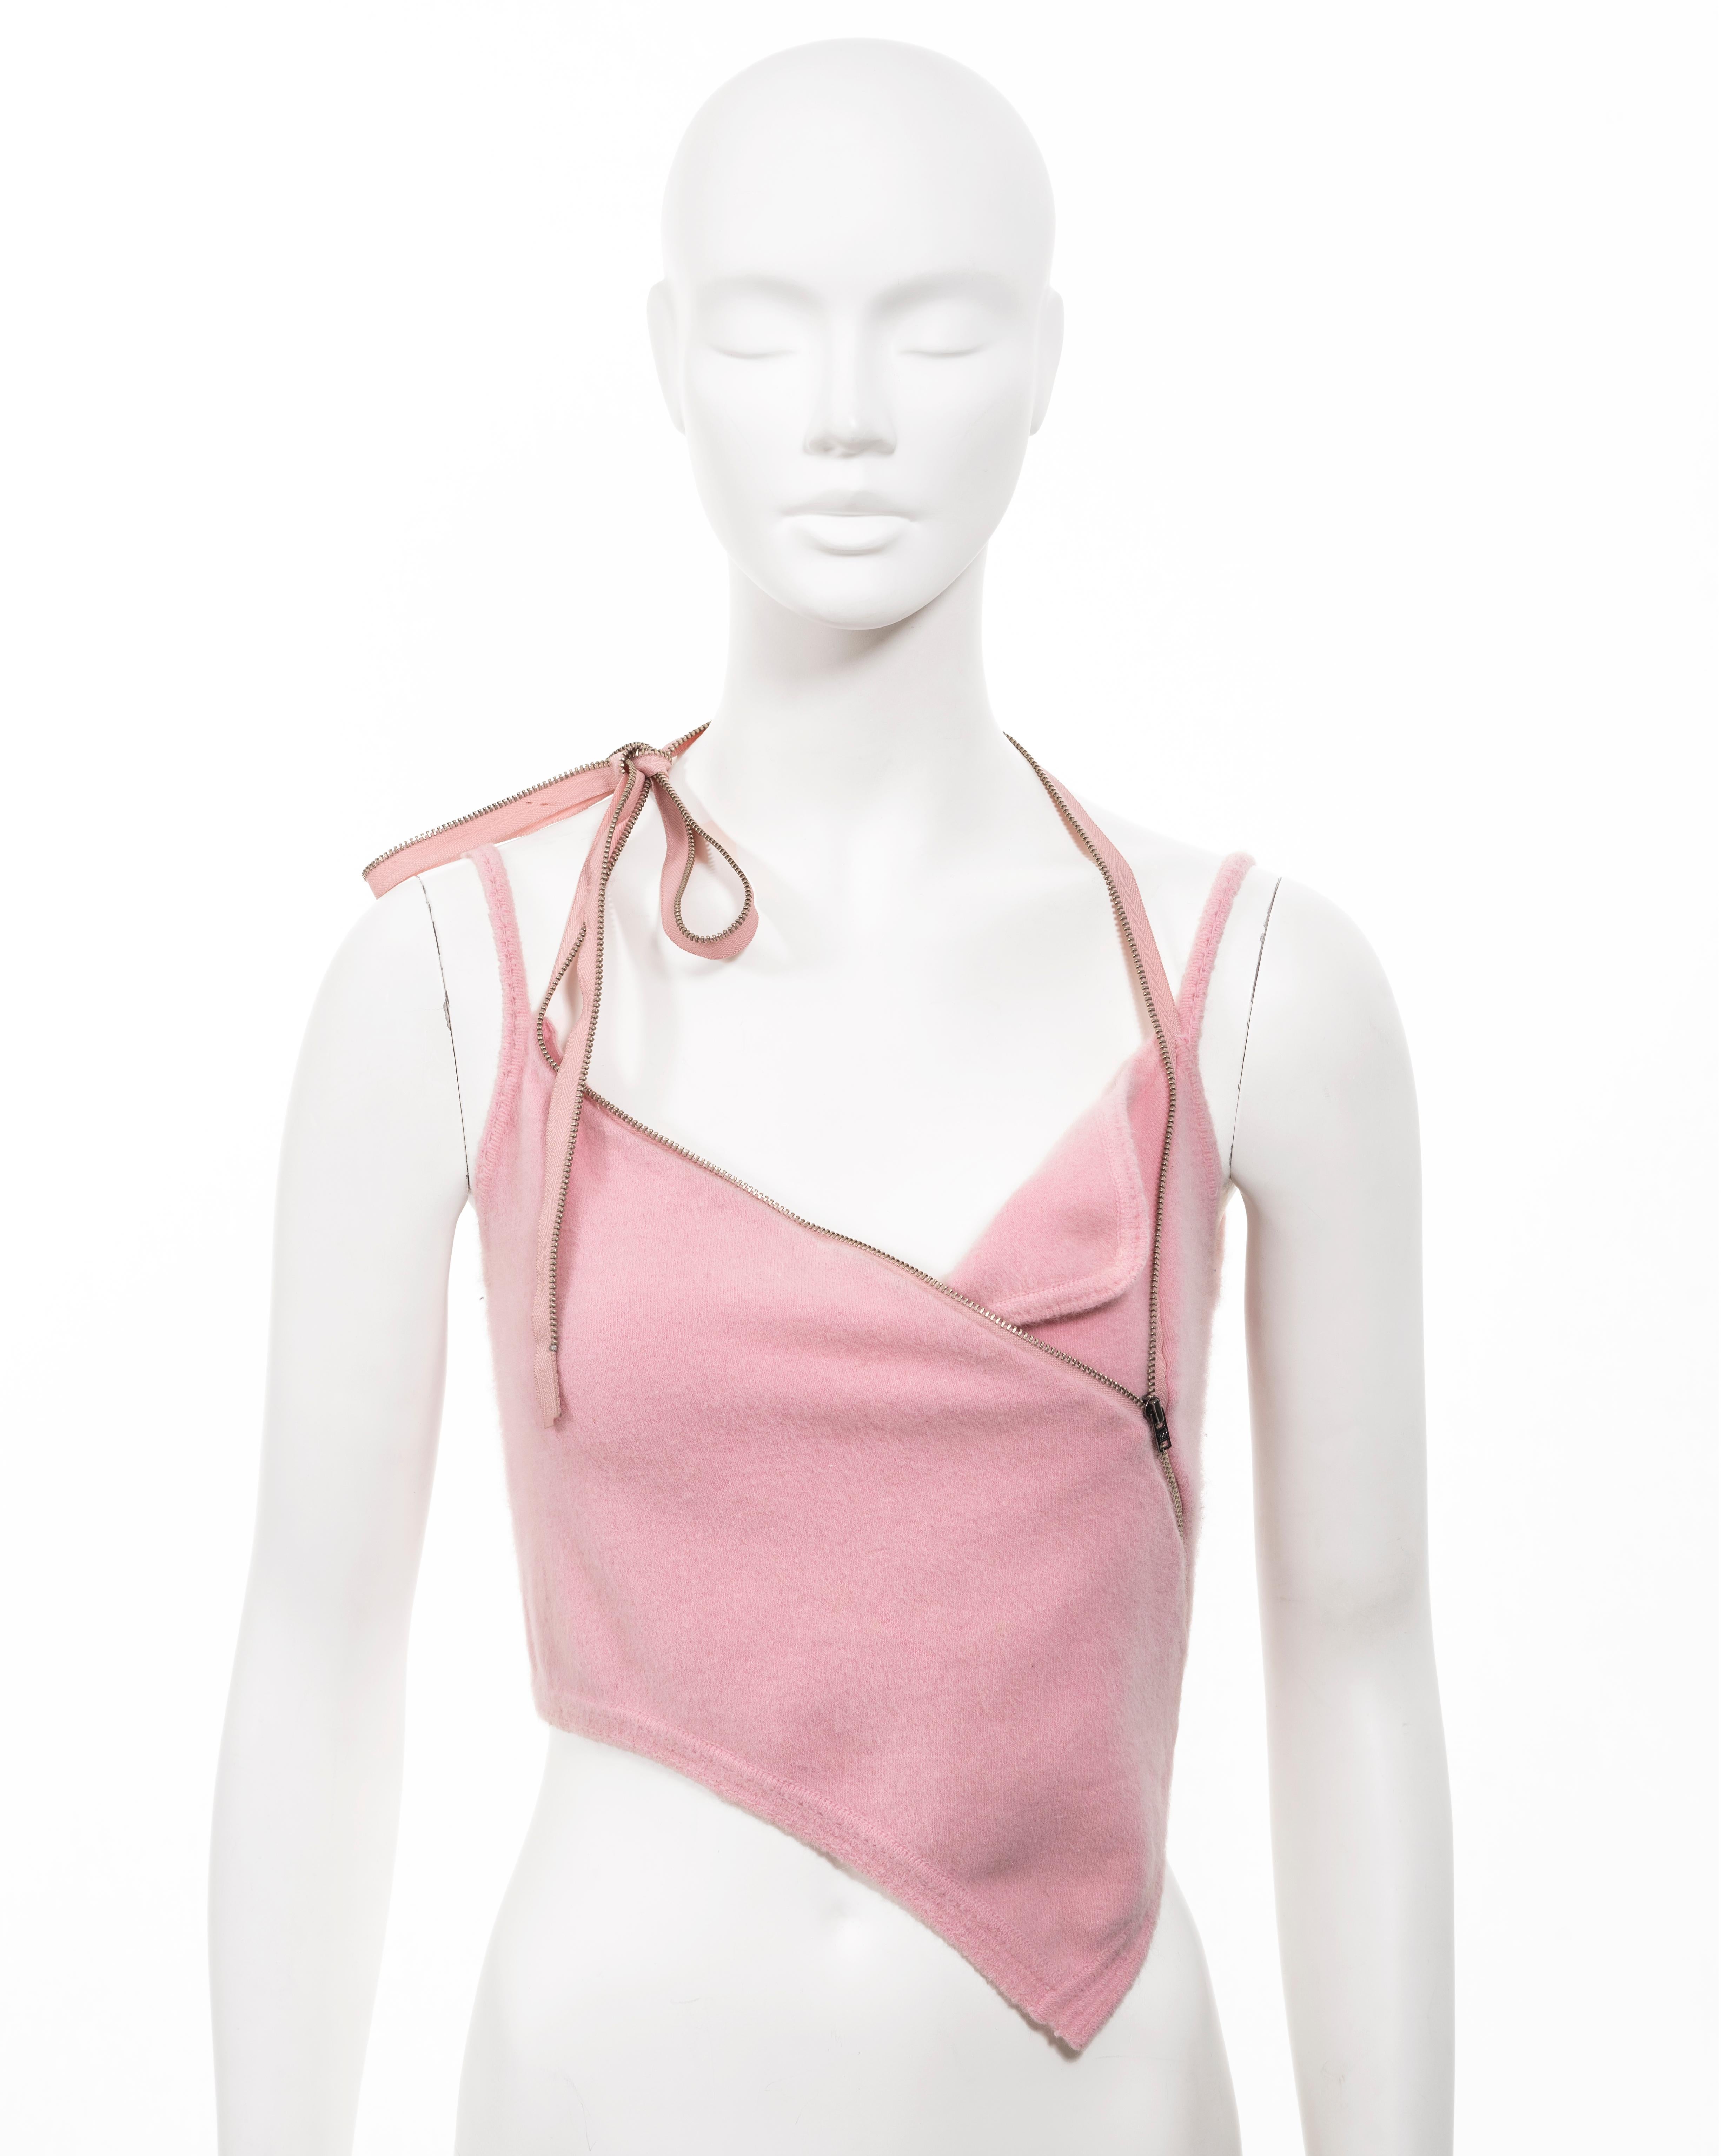 ▪ John Galliano crop top
▪ Spring-Summer 2000
▪ Constructed from baby pink fuzzy Angora 
▪ Asymmetric cut 
▪ Zip fastening at the chest extending into two halter-neck ties 
▪ Spaghetti straps 
▪ Size 'M' 
▪ Made in Italy 
▪ 48% Angora, 38% Nylon, 9%